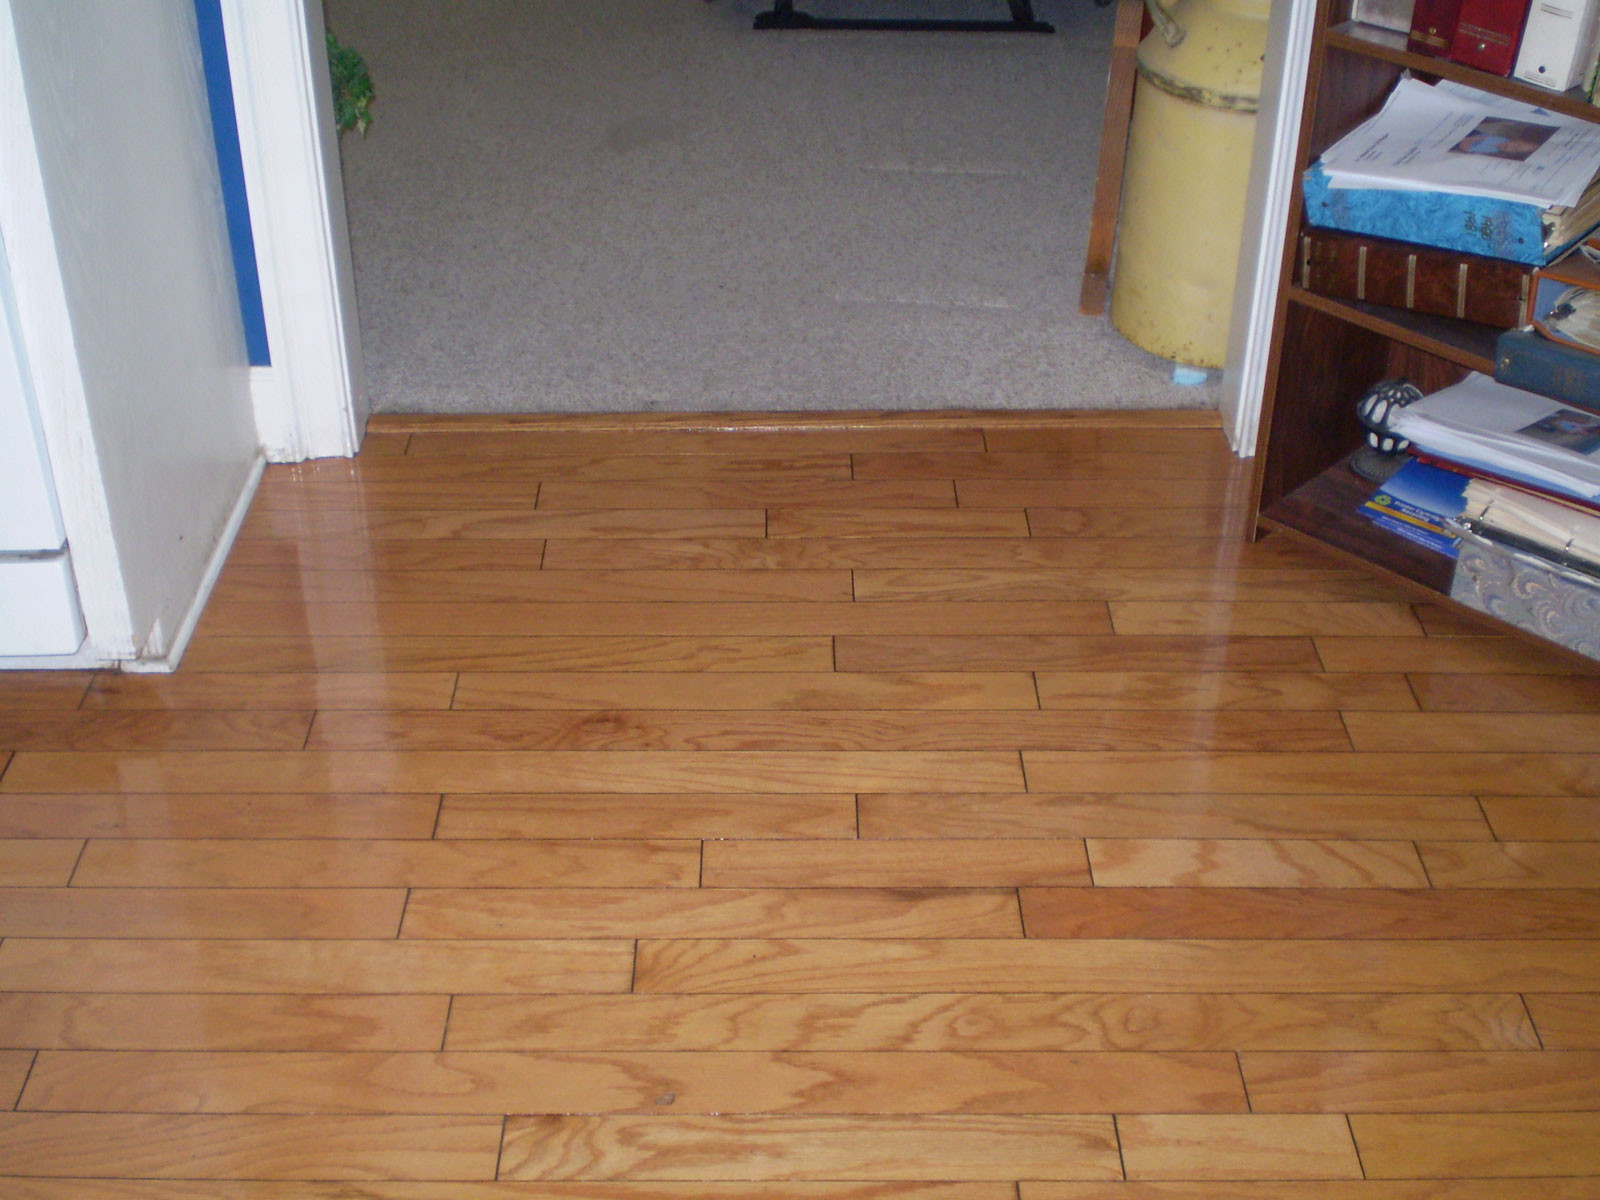 17 Stunning Best Hardwood Floor Installers Near Me 2024 free download best hardwood floor installers near me of hardwood floor refinishing richmond va floor with hardwood floor refinishing richmond va will refinishingod floors pet stains old without sanding wo